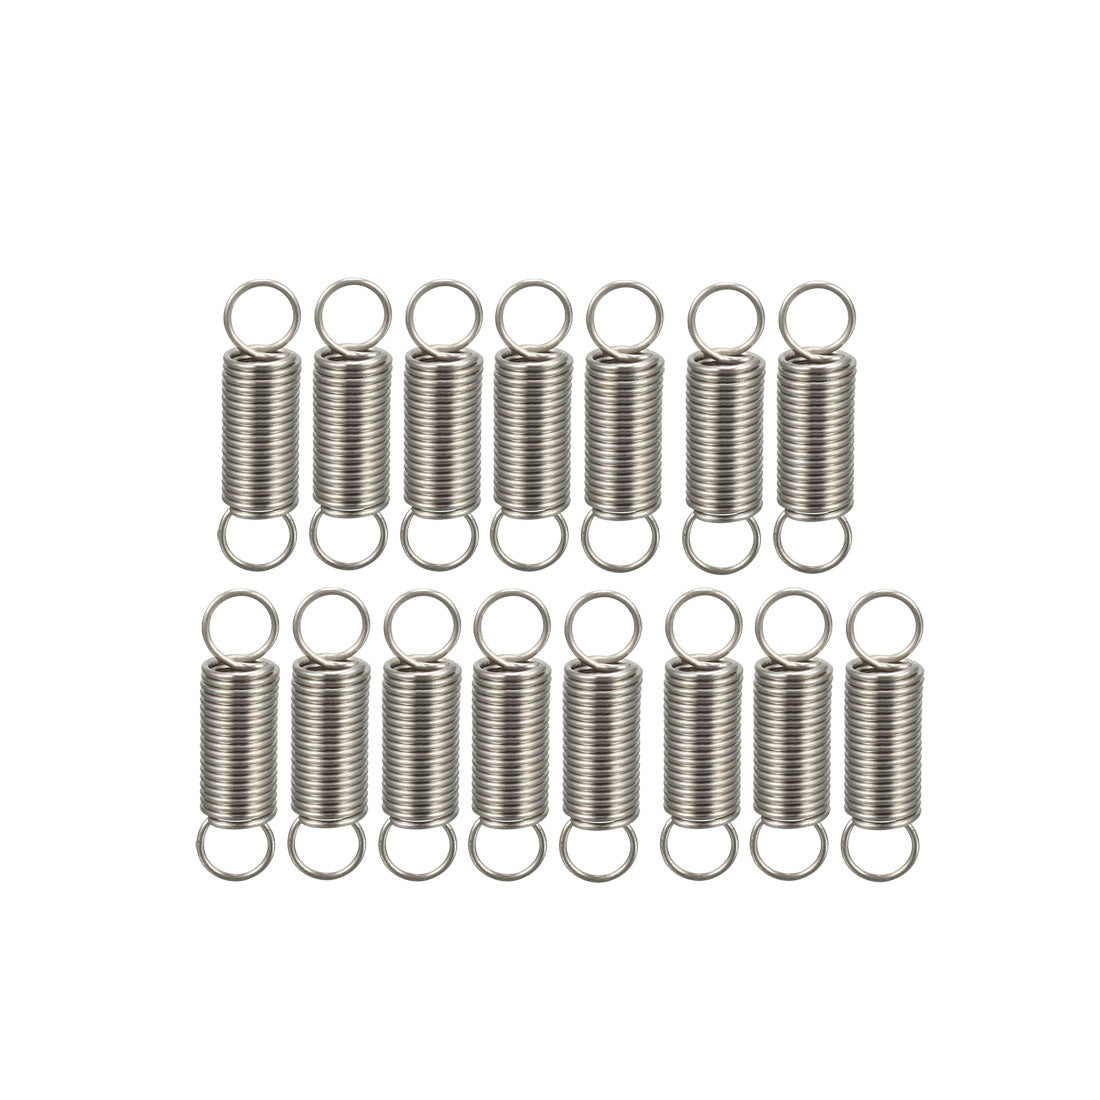 uxcell Uxcell Extended Tension Spring Wire Diameter 0.016", OD 0.16", Free Length 0.59" 15pcs